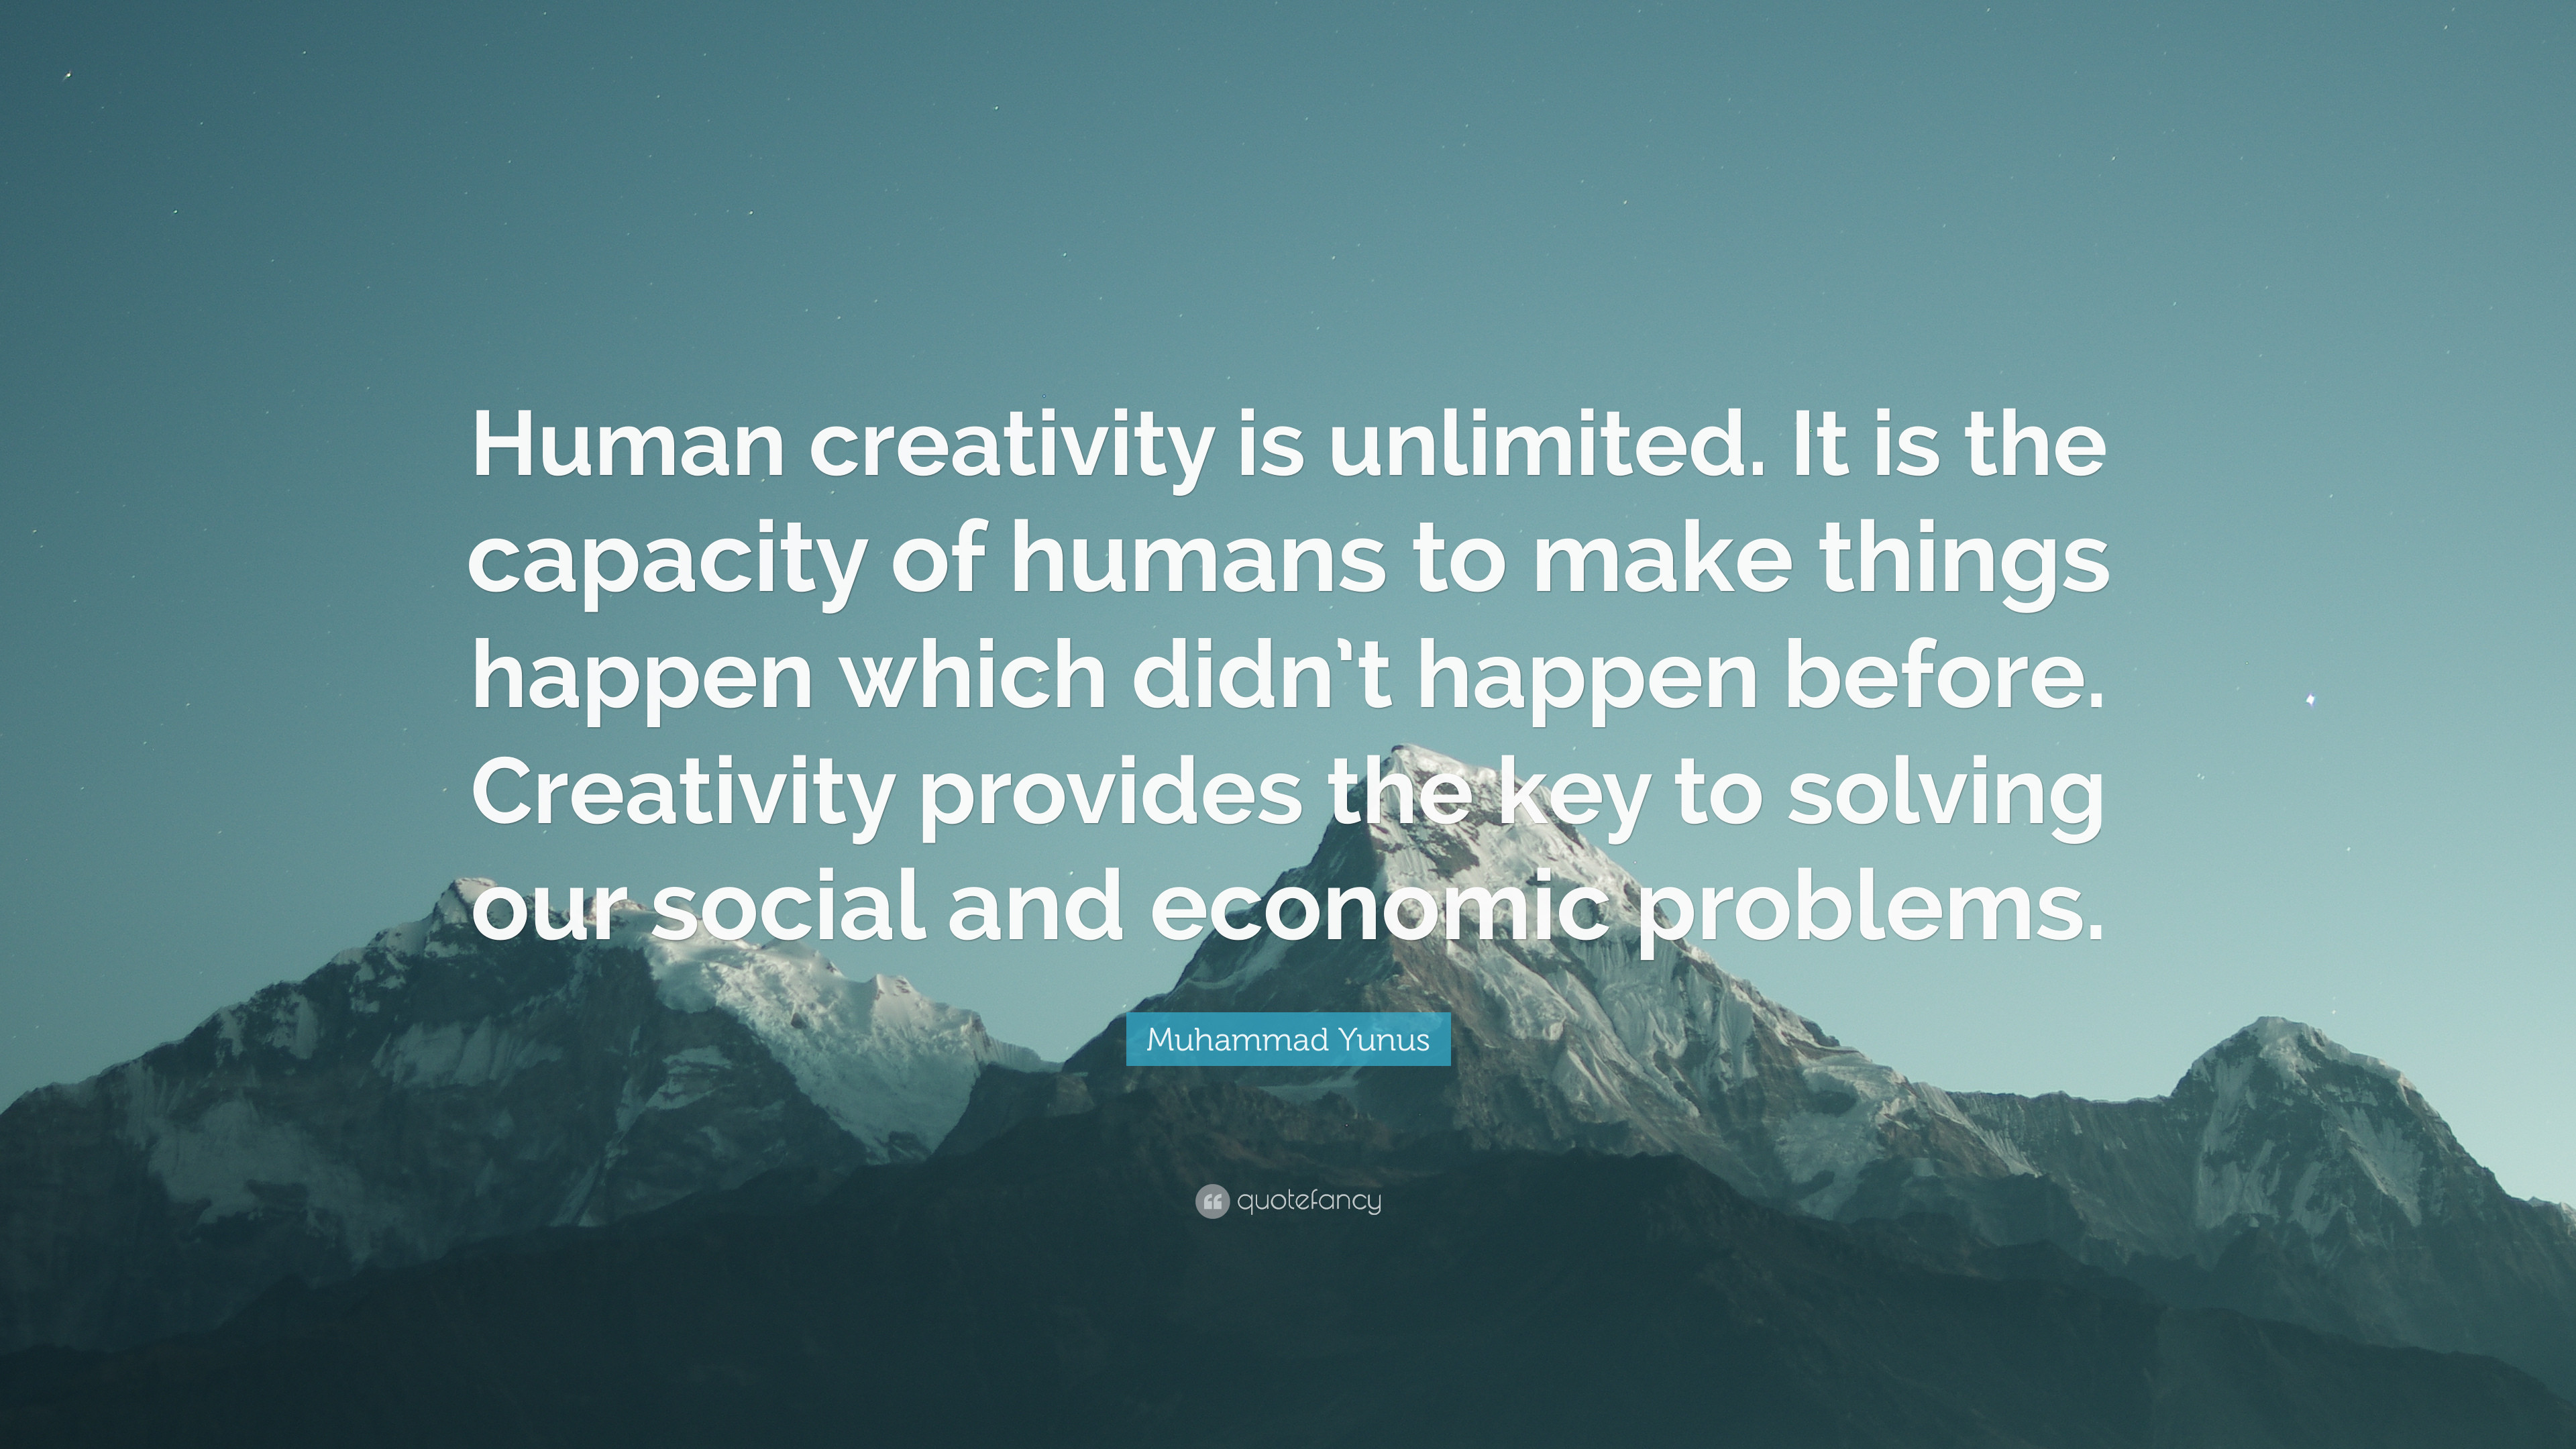 3840x2160 Muhammad Yunus Quote: “Human creativity is unlimited. It is the capacity of  humans